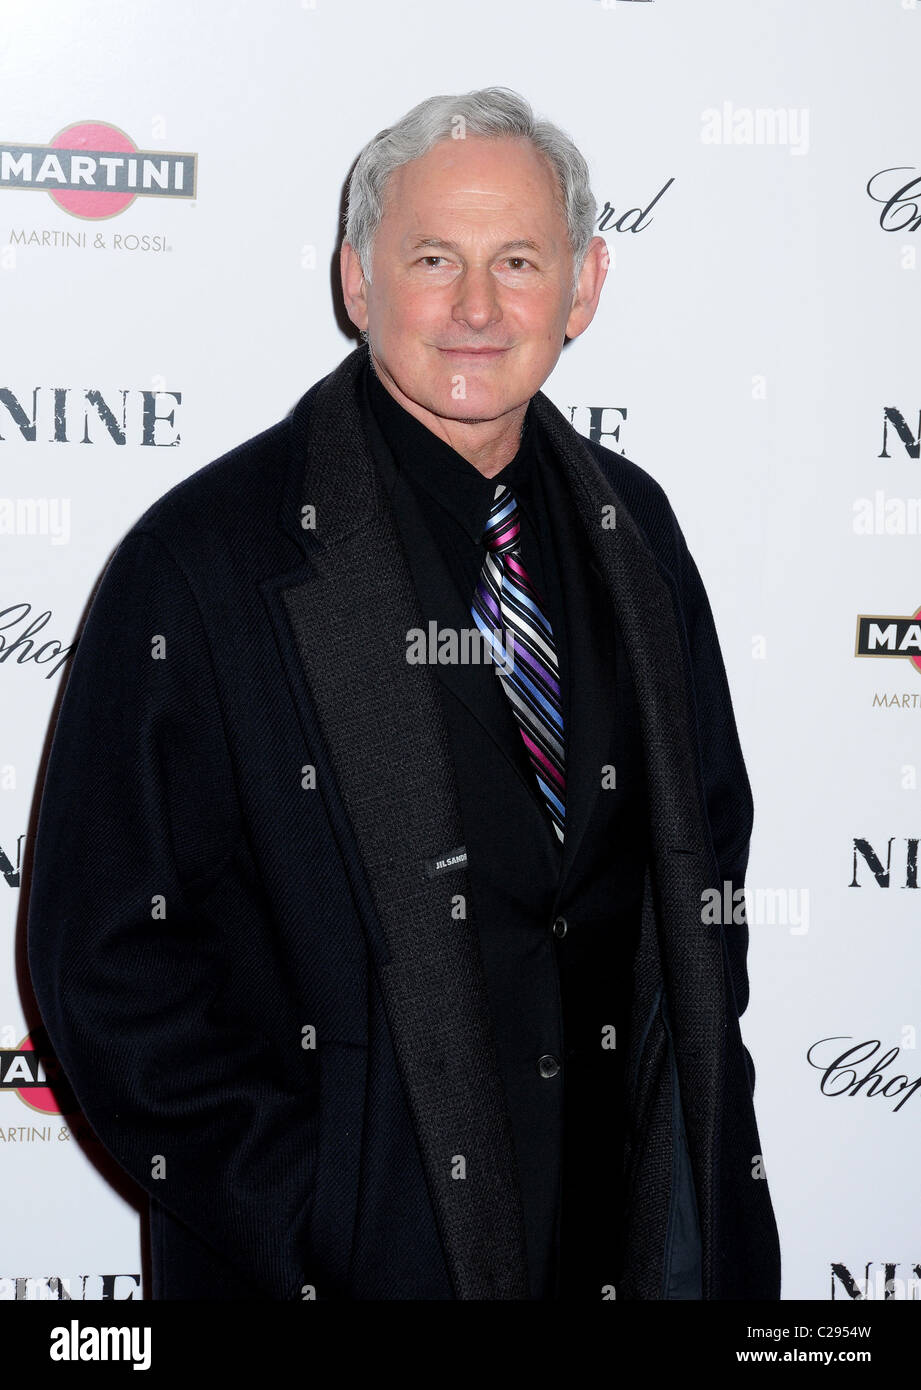 Victor Garber New York premiere of 'Nine' sponsored by Chopard at the Ziegfeld Theatre New York City, USA - 15.12.09 Stock Photo